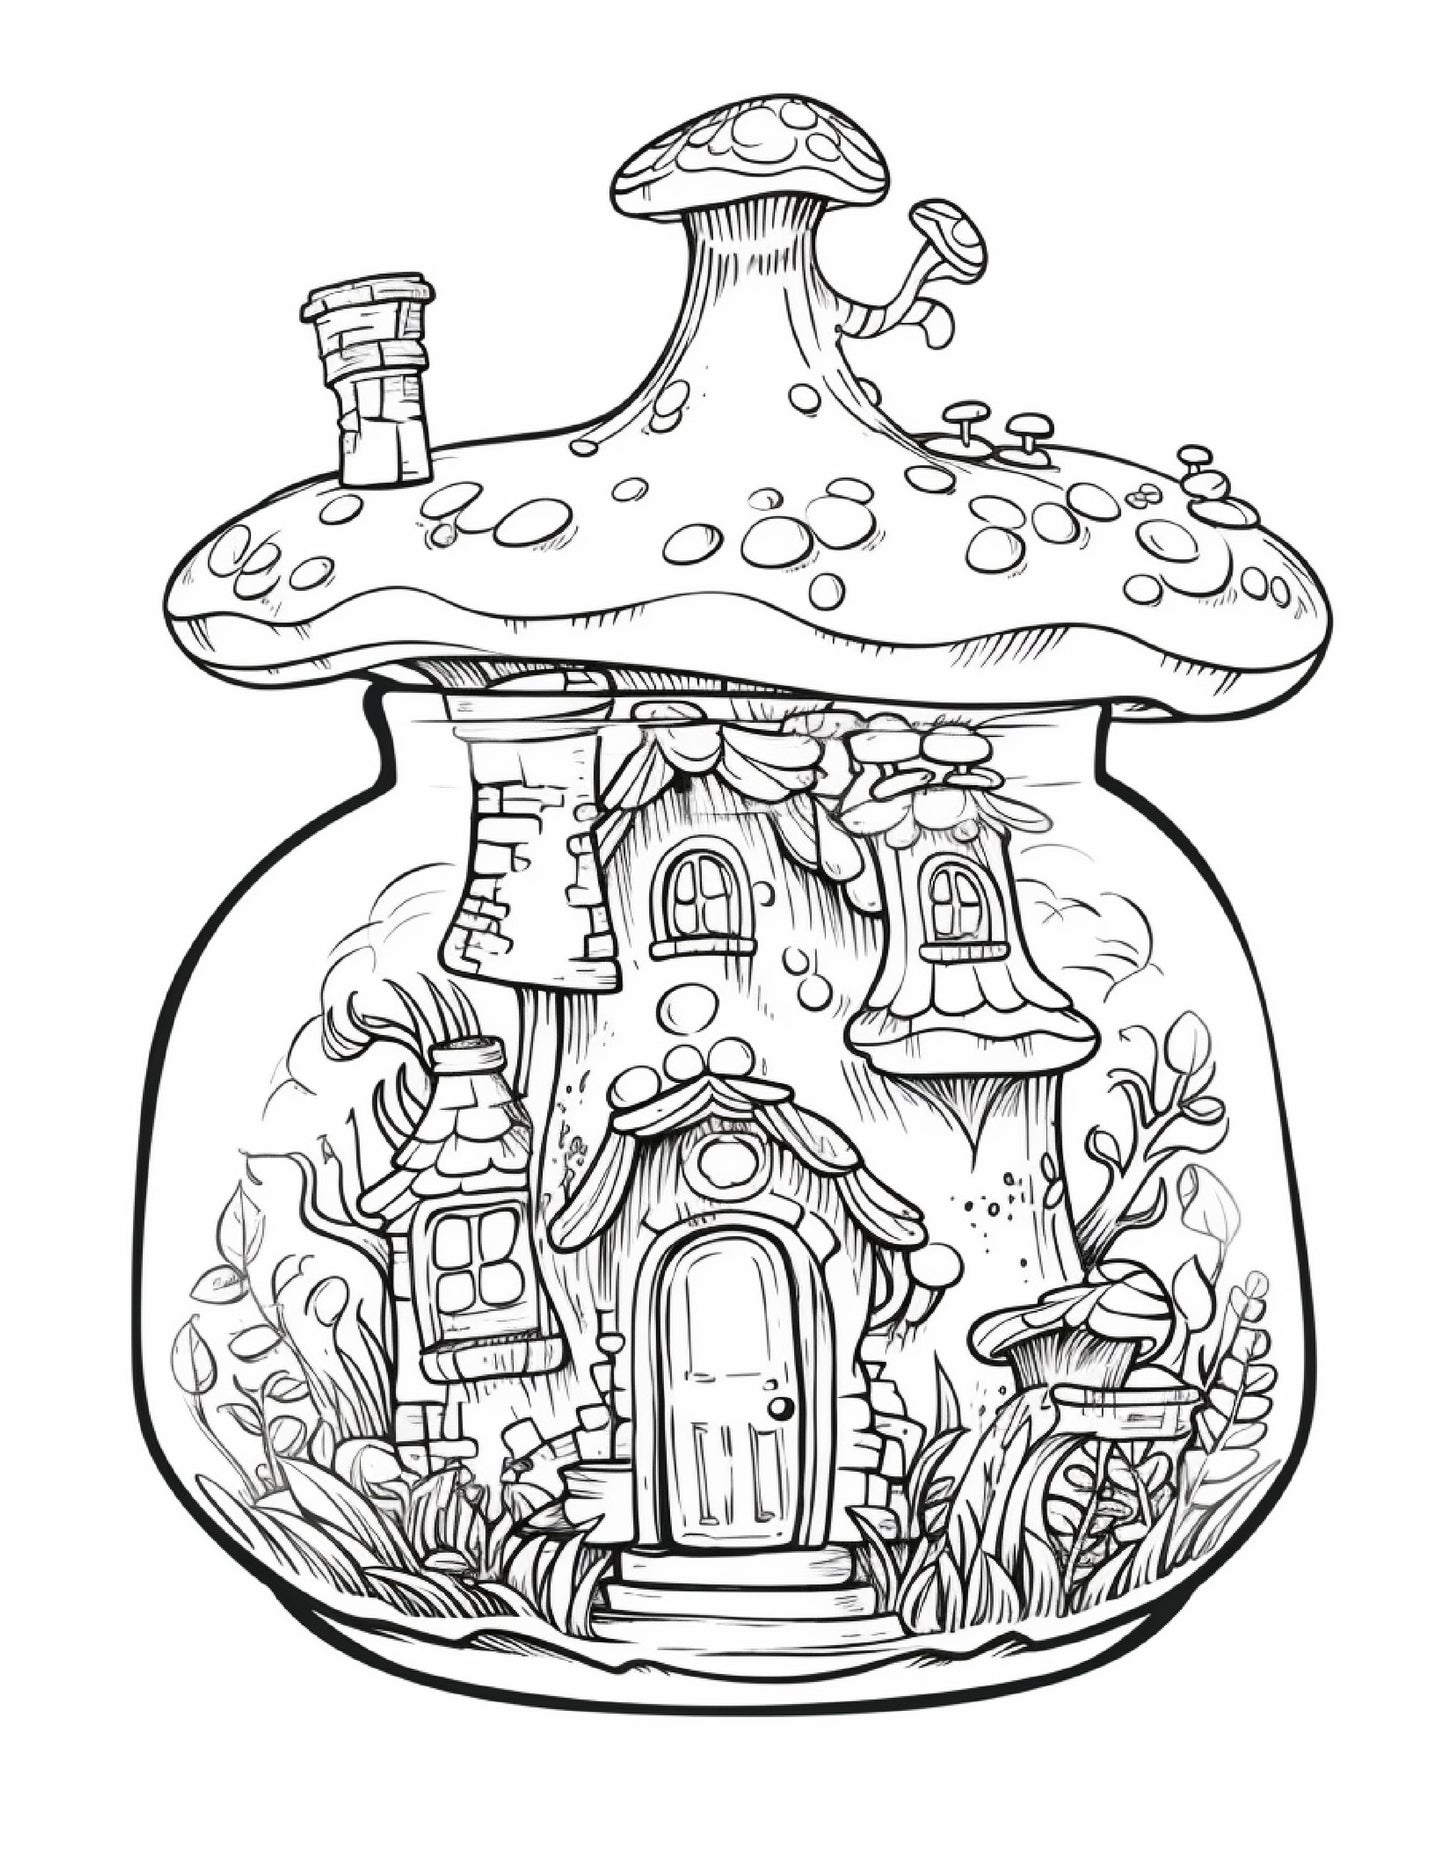 50 Printable Fairy Houses in Jar Coloring Pages for Adults, Grayscale Coloring Book, Stress Relief Coloring Pages, Printable PDF Instant Download - raspiee